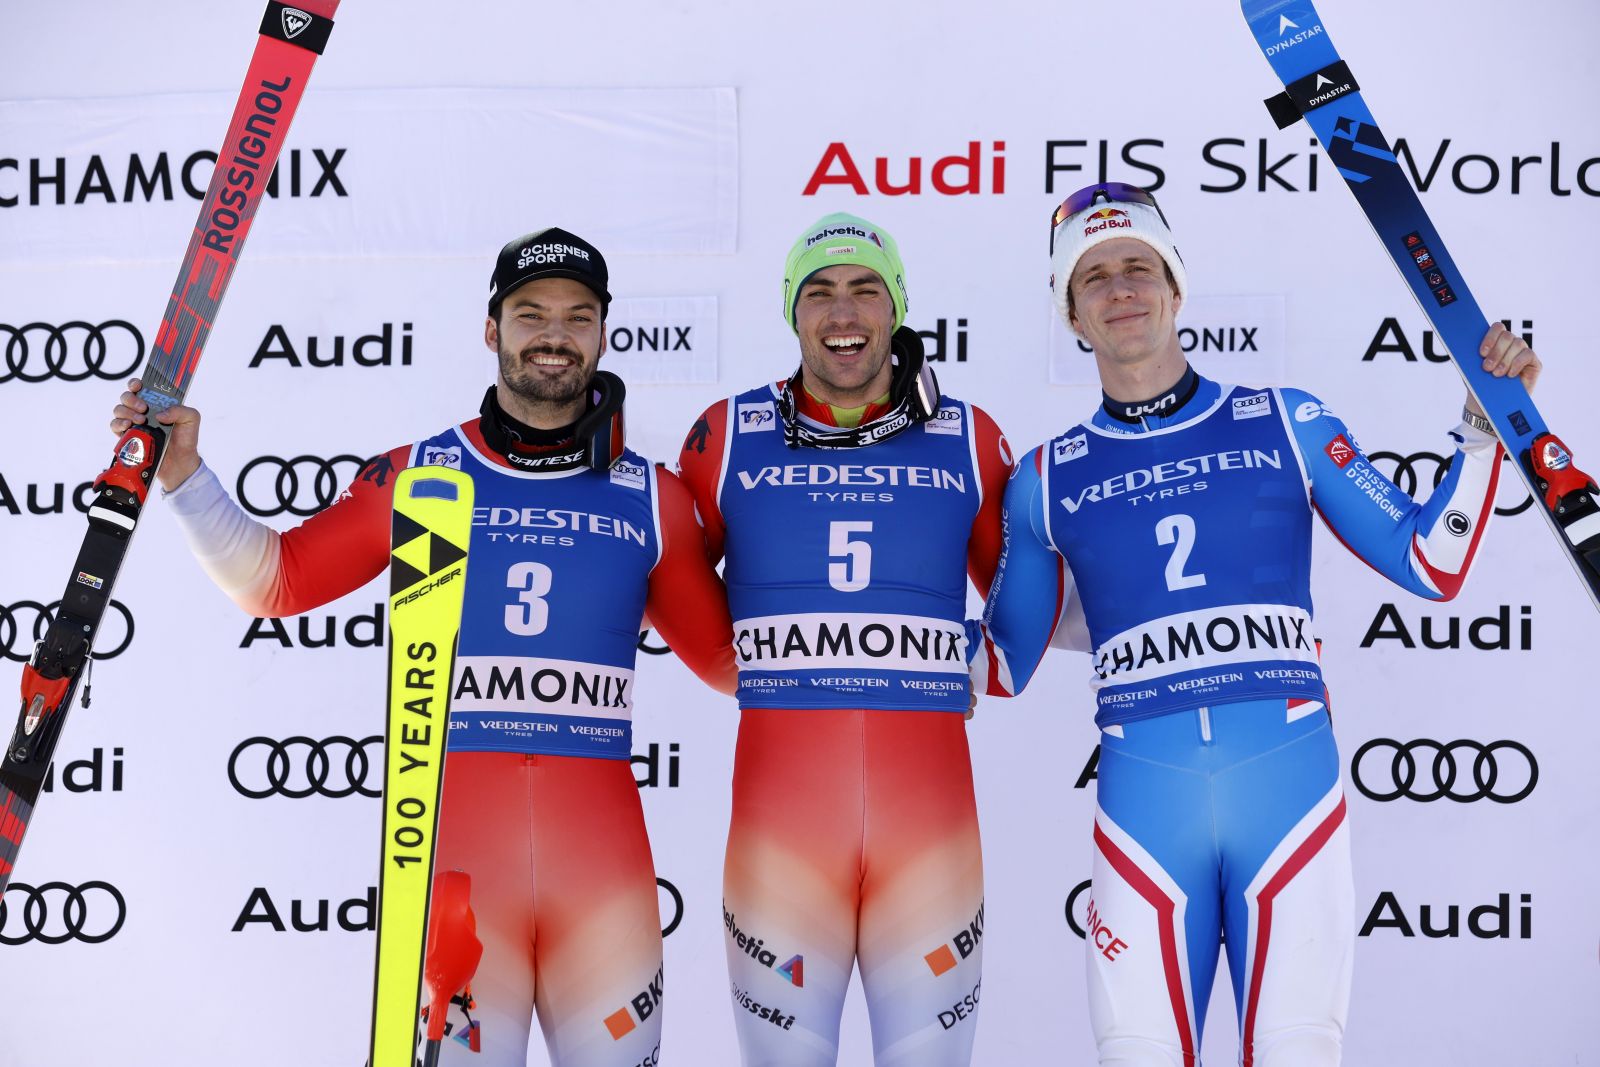 epa11125918 (L-R) Second placed Loic Meillard of Switzerland, first placed Daniel Yule of Switzerland and third placed Clement Noel of France celebrate on the podium after the Men's Slalom race at the FIS Alpine Skiing World Cup event in Chamonix, France, 04 February 2024.  EPA/SEBASTIEN NOGIER